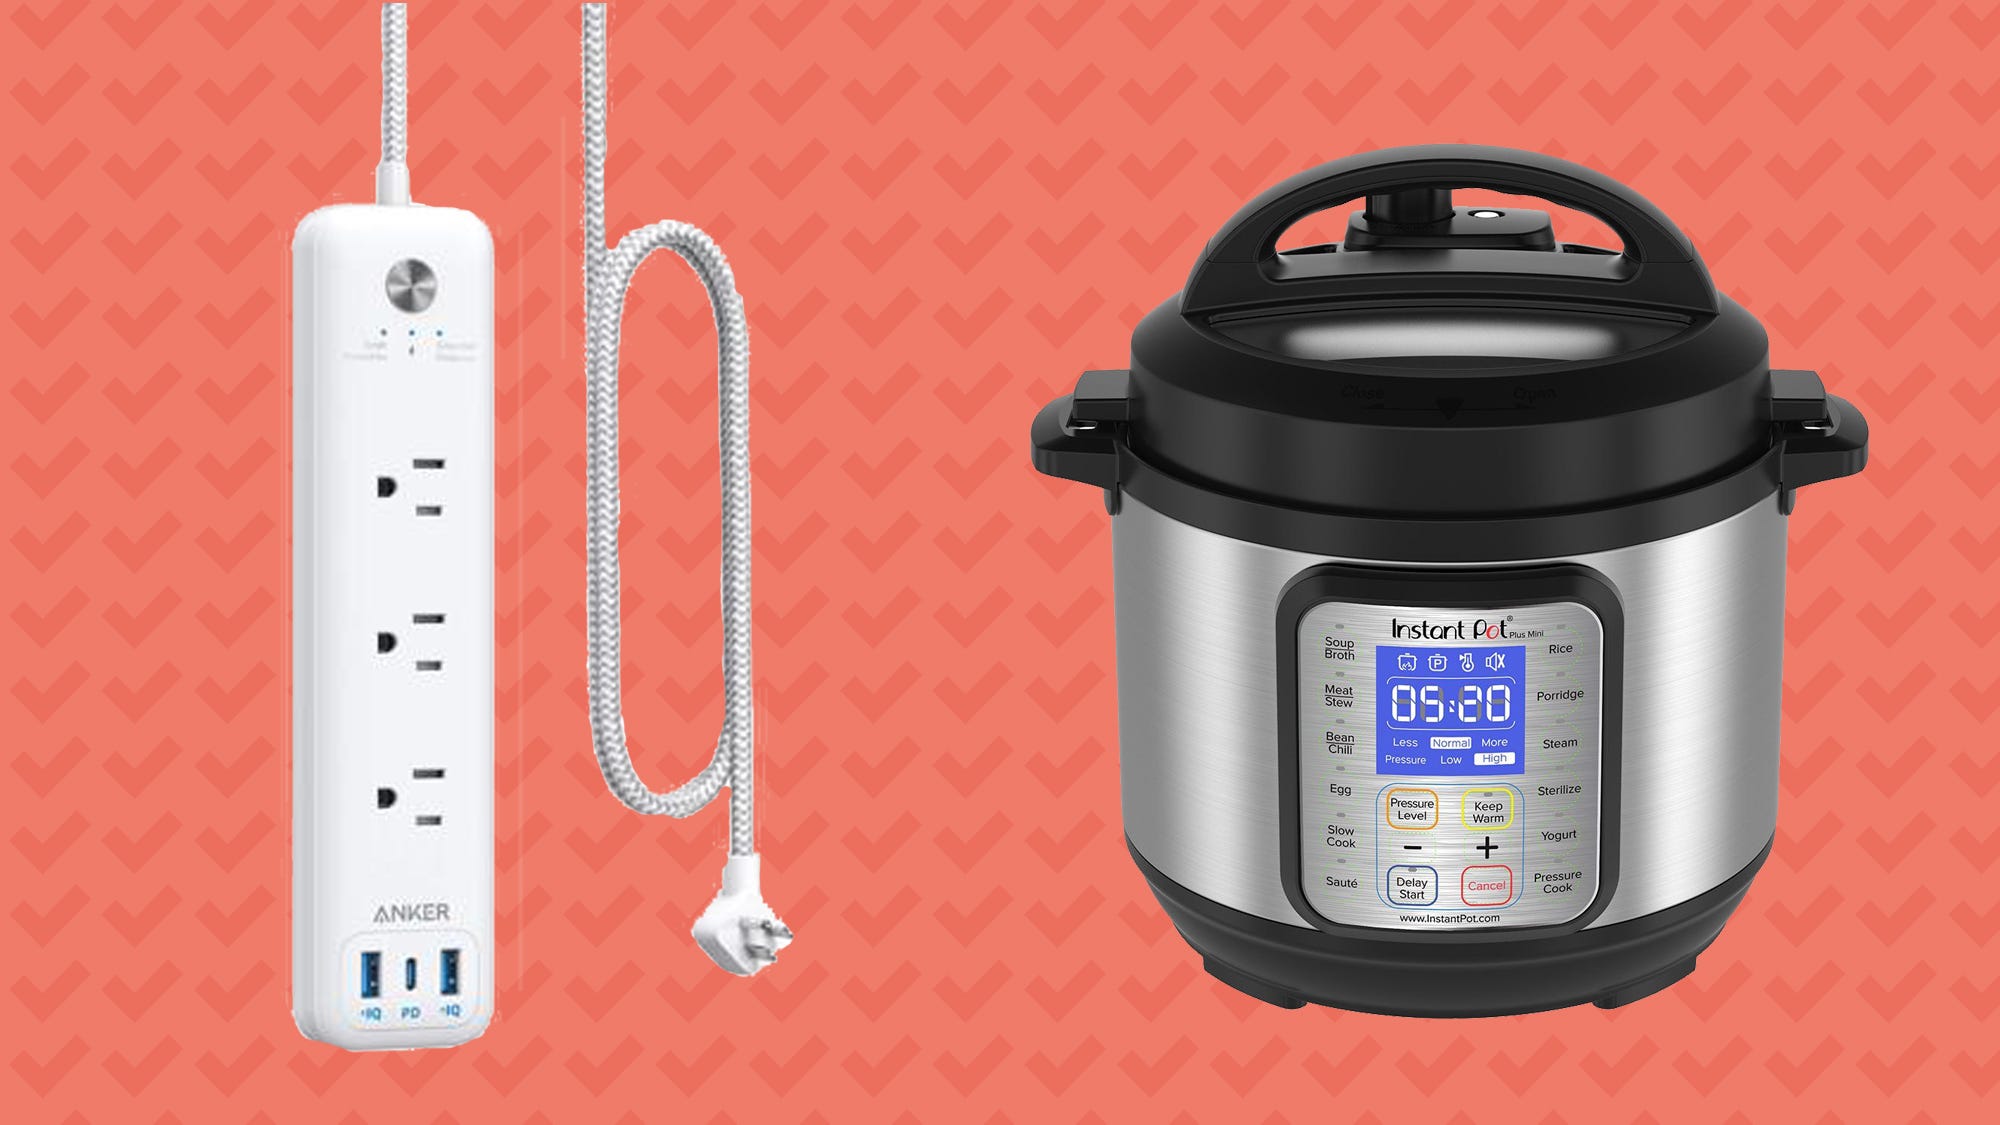 Shop our top sale picks on Instant Pots, patio lights and more